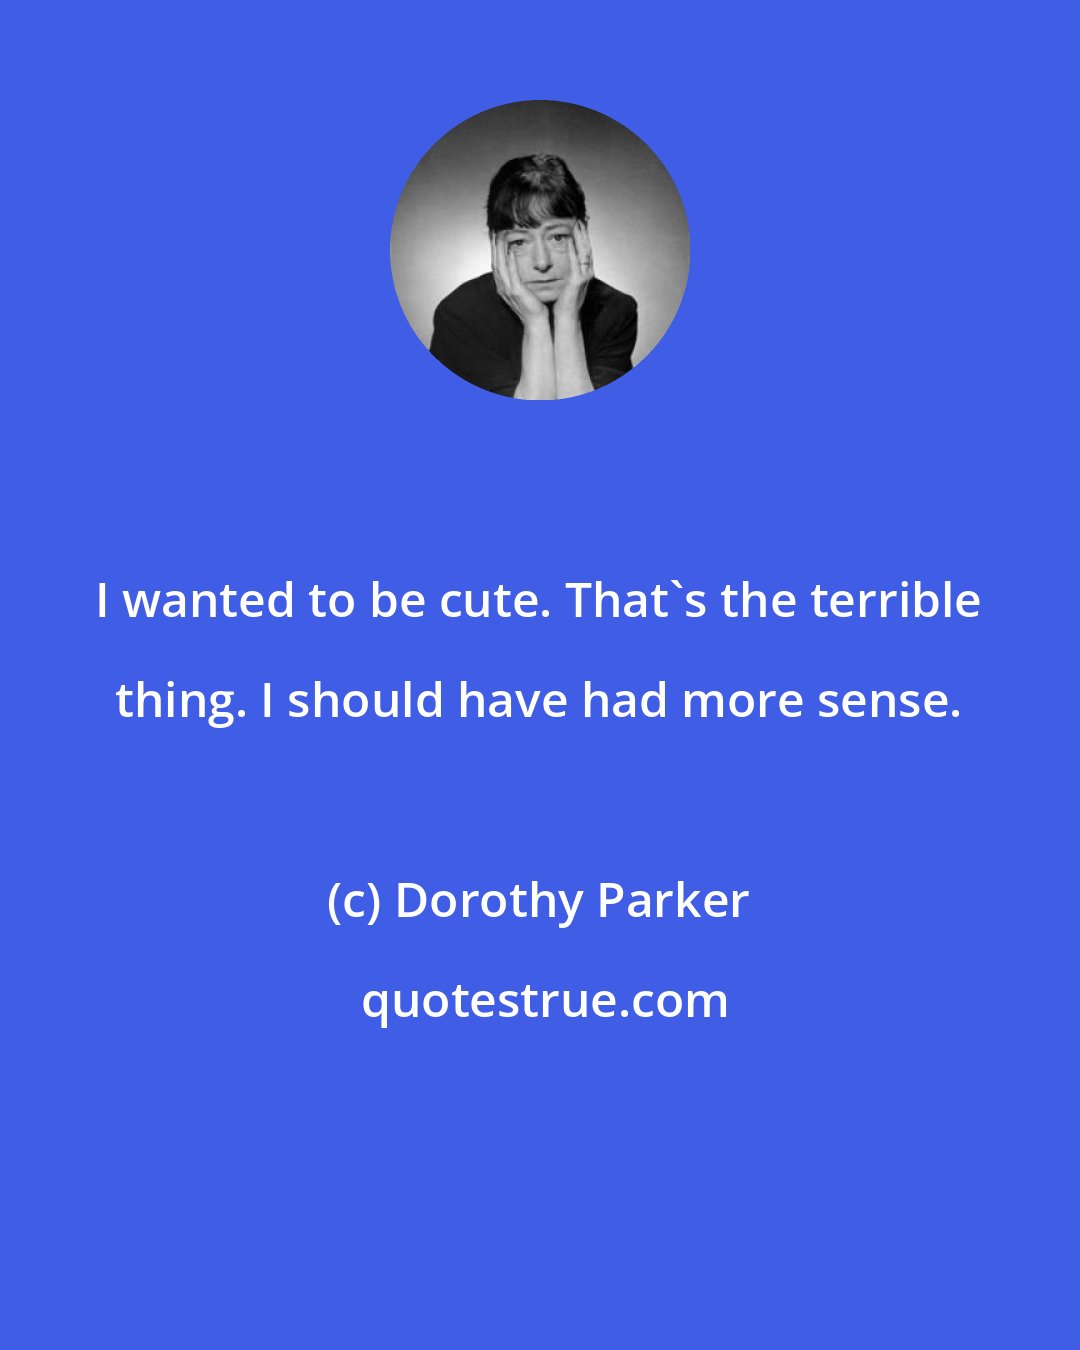 Dorothy Parker: I wanted to be cute. That's the terrible thing. I should have had more sense.